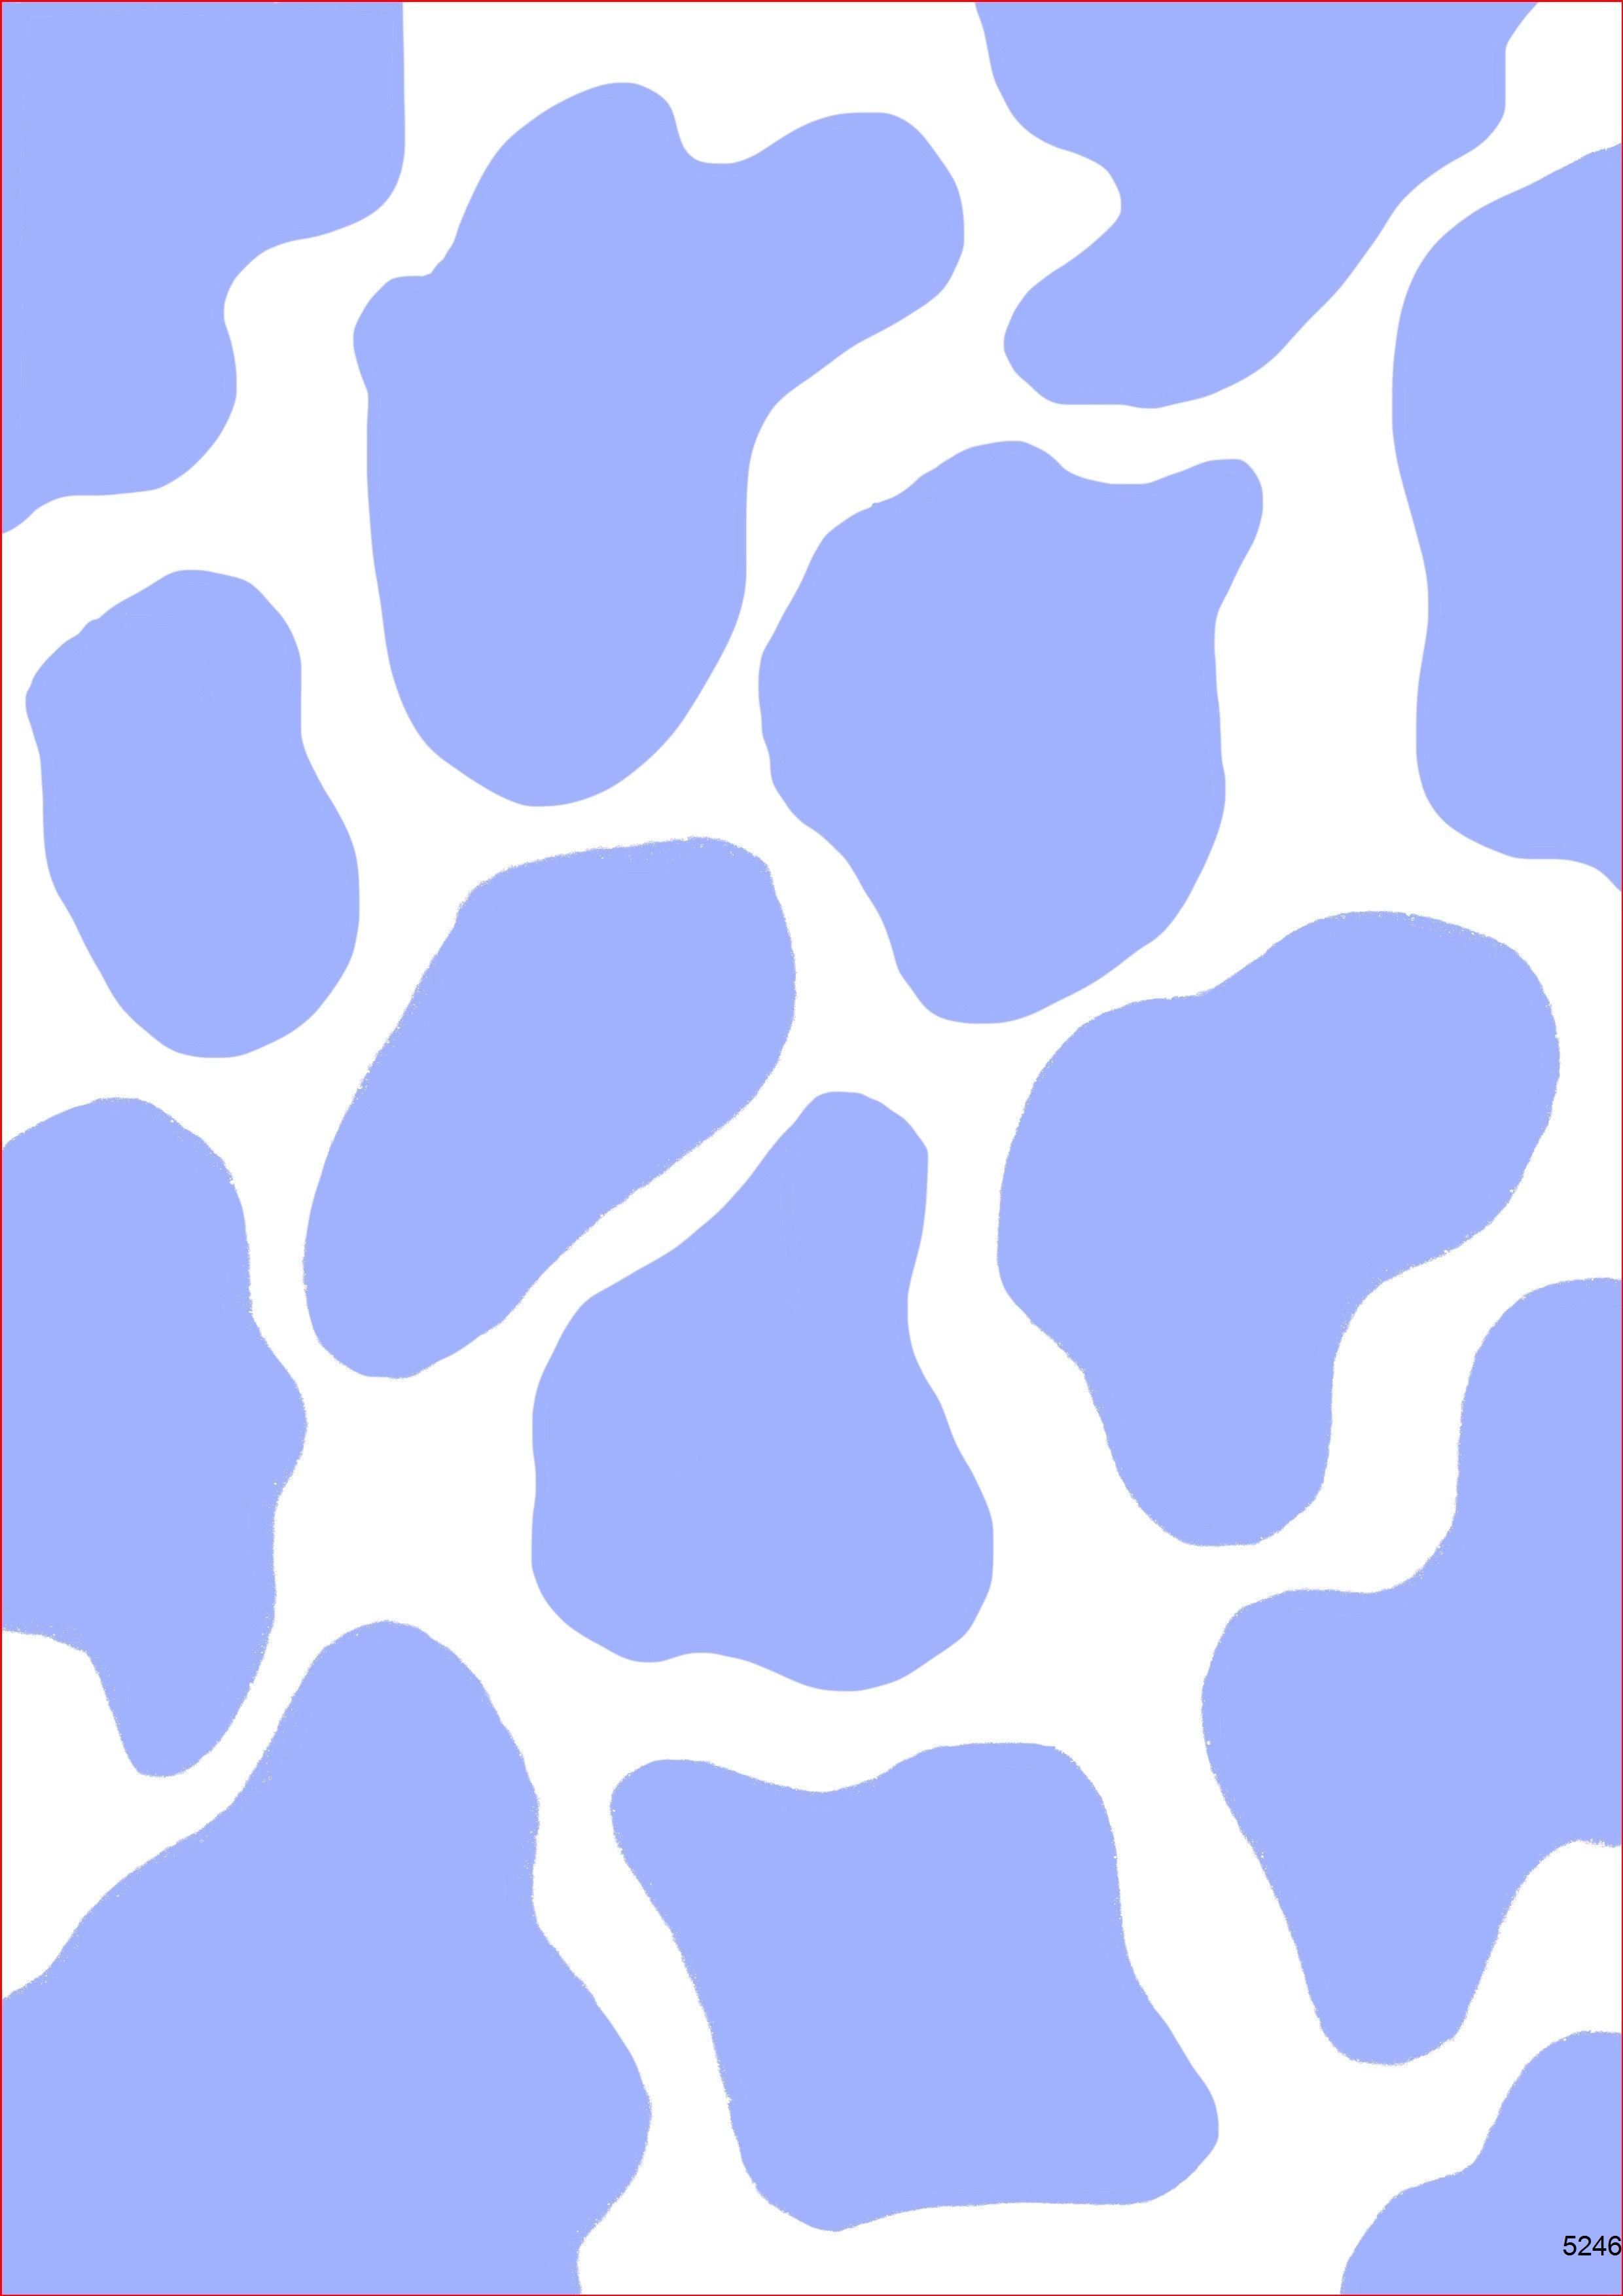 A blue and white patterned background - Cow